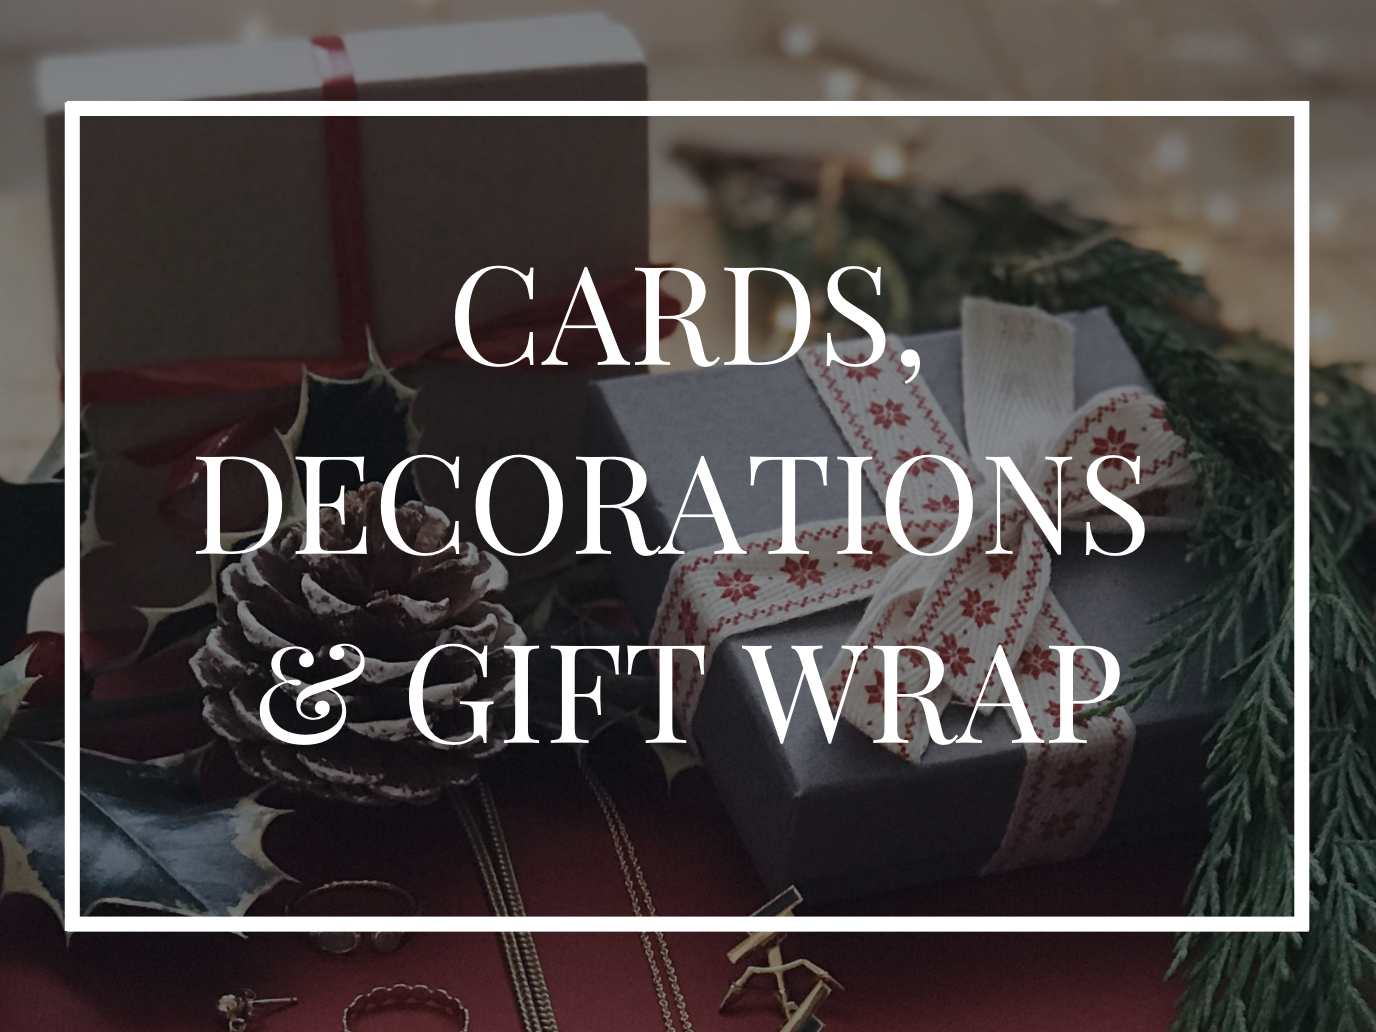 Cards, Decorations and Gift Wrap